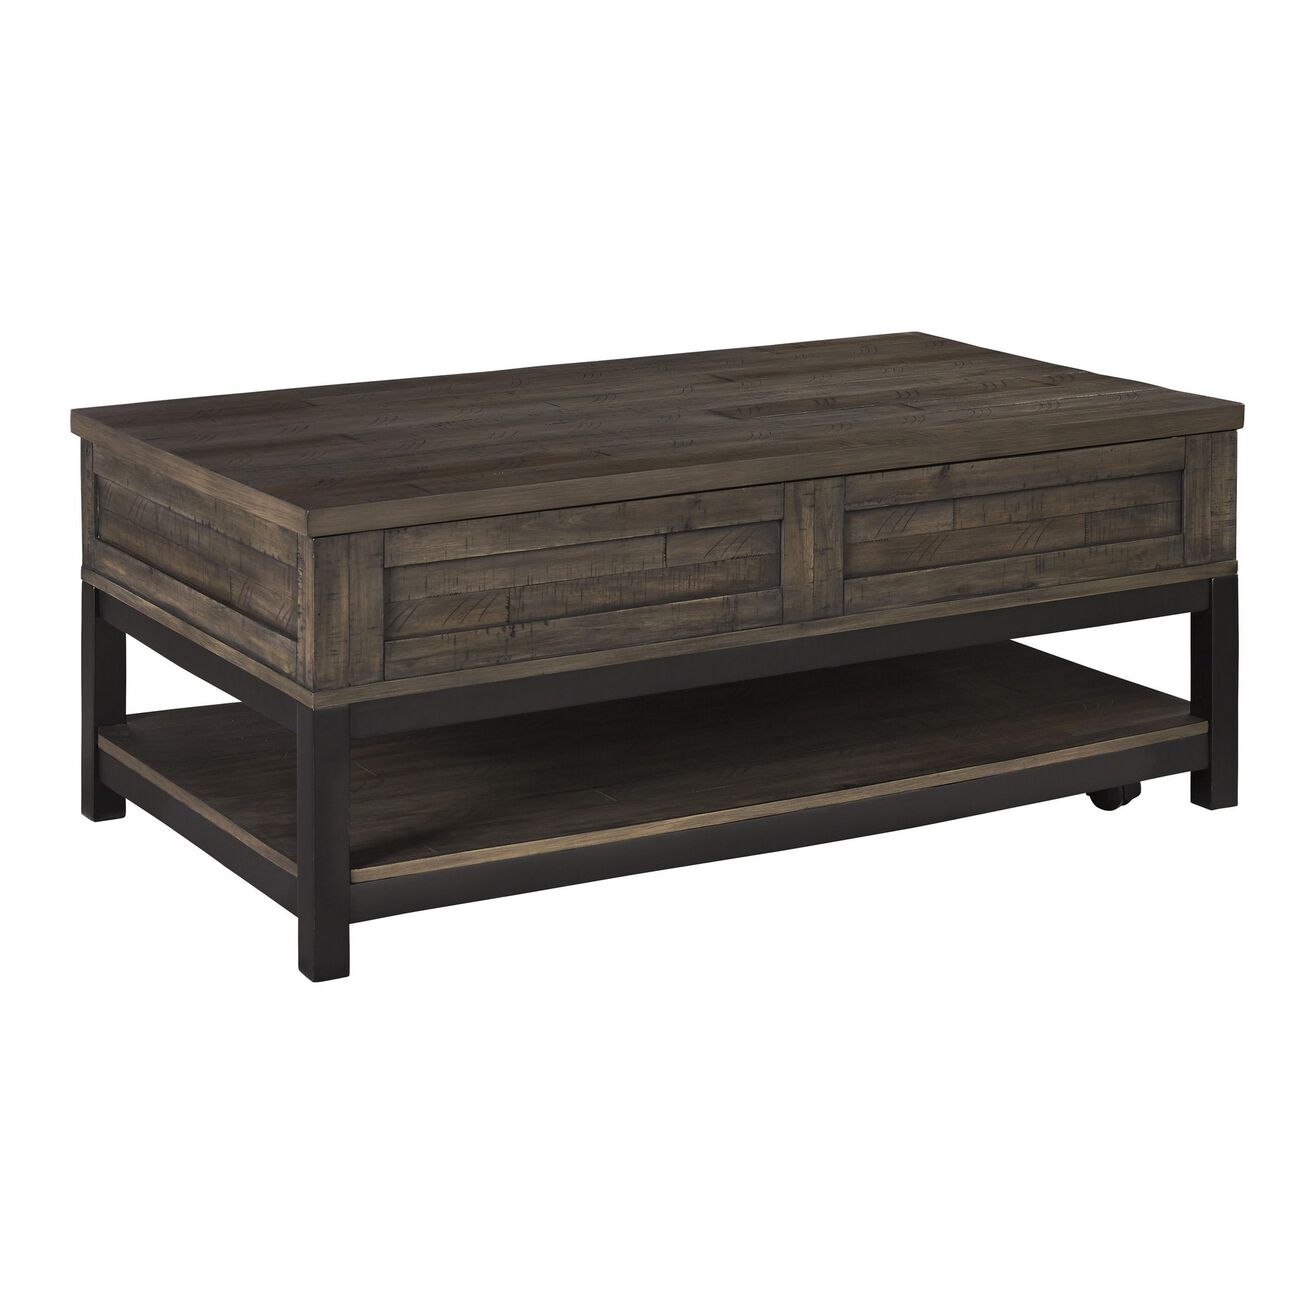 Rectangular Lift Top Wooden Cocktail Table with Open Shelf, Brown